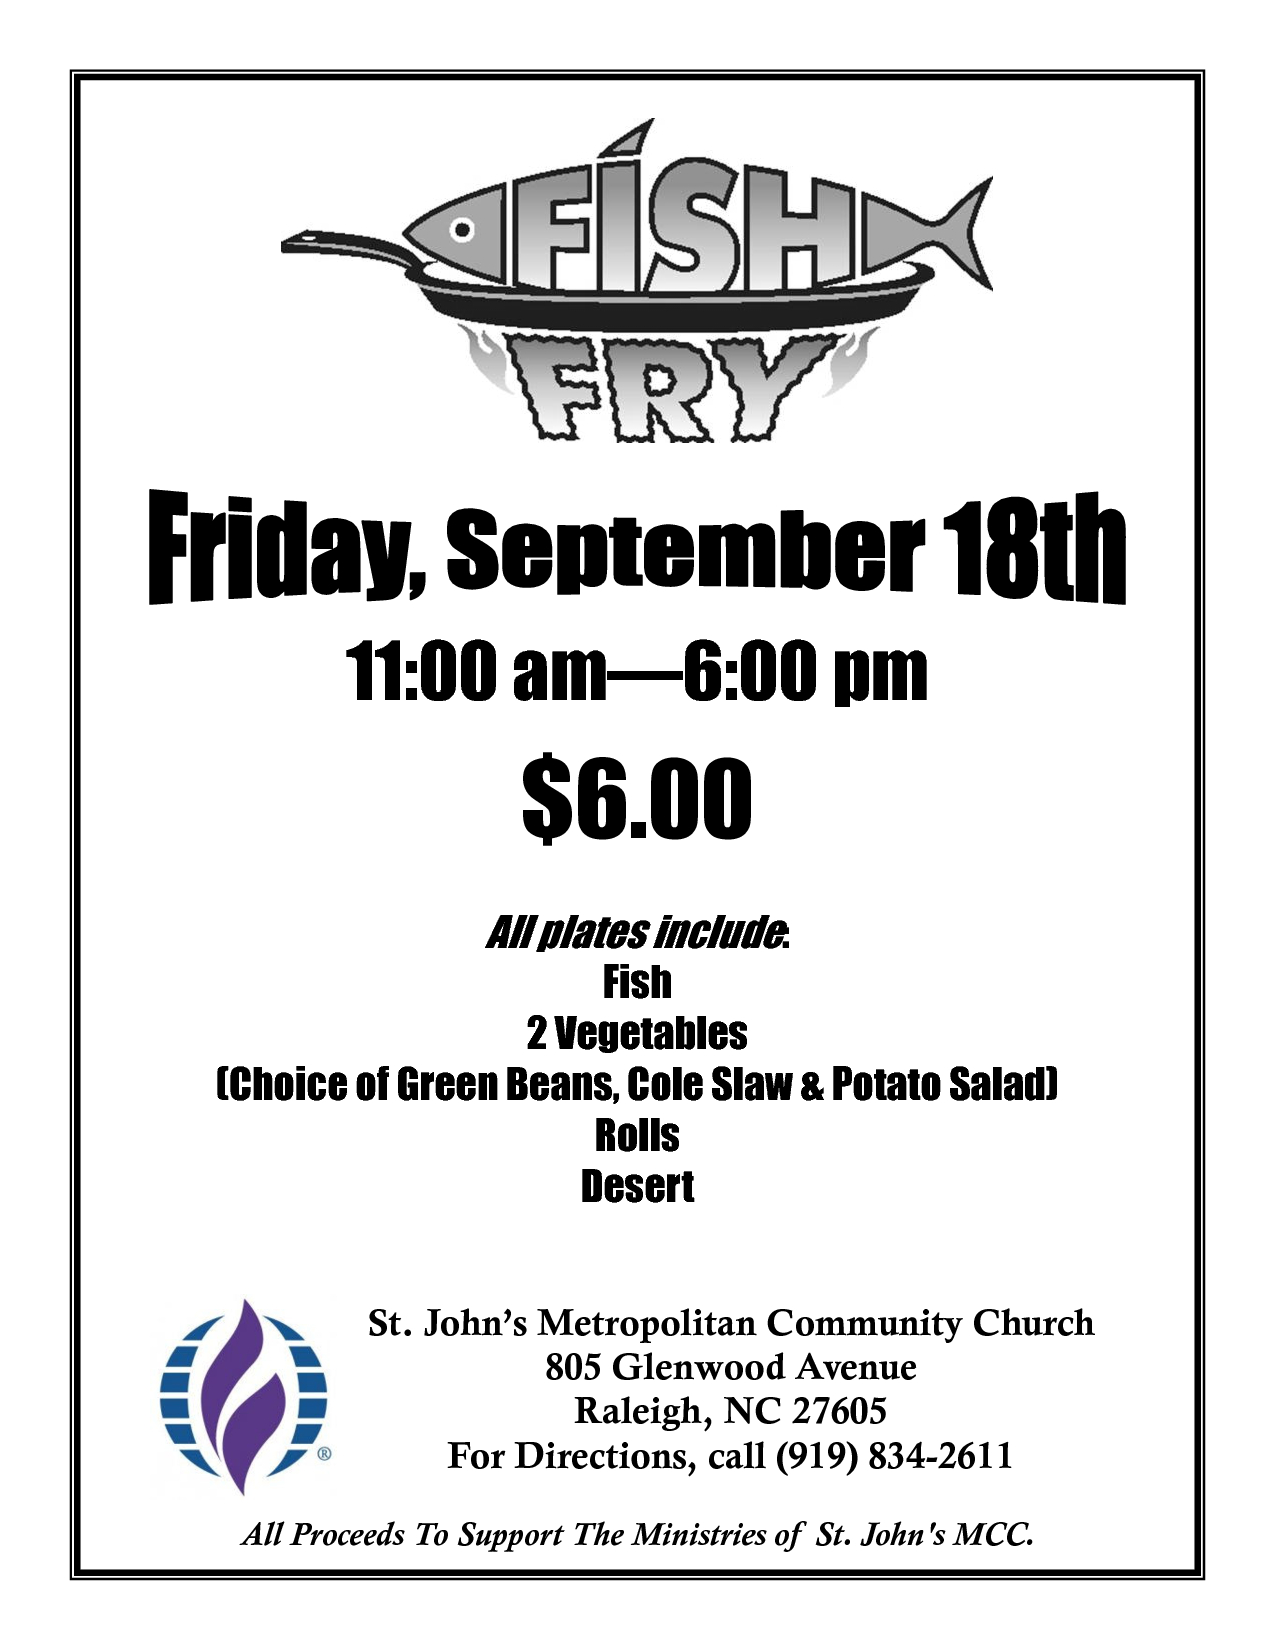 Free Fish Fry Flyer Templates Fish Fry Poster Fish Fry Fried with regard to size 1275 X 1650